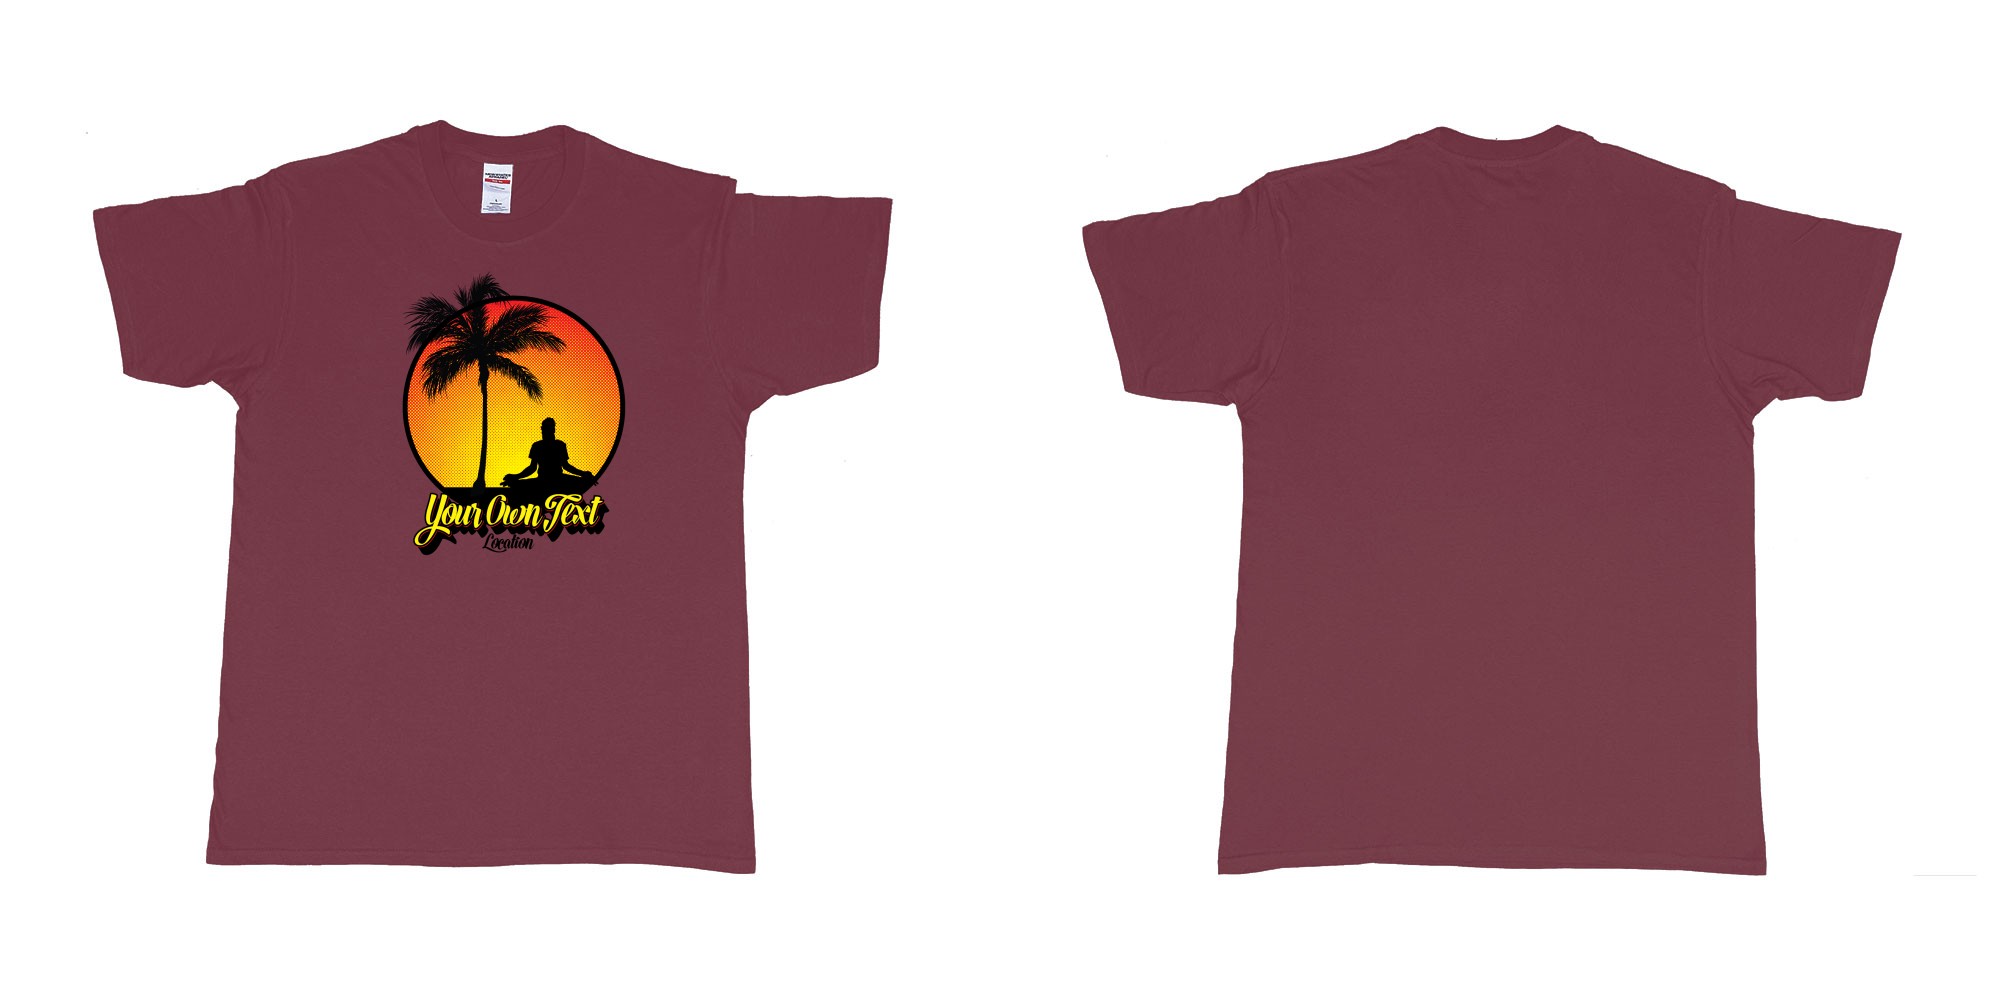 Custom tshirt design yoga palmtree sunset halftone your own text location screen printing bali in fabric color marron choice your own text made in Bali by The Pirate Way